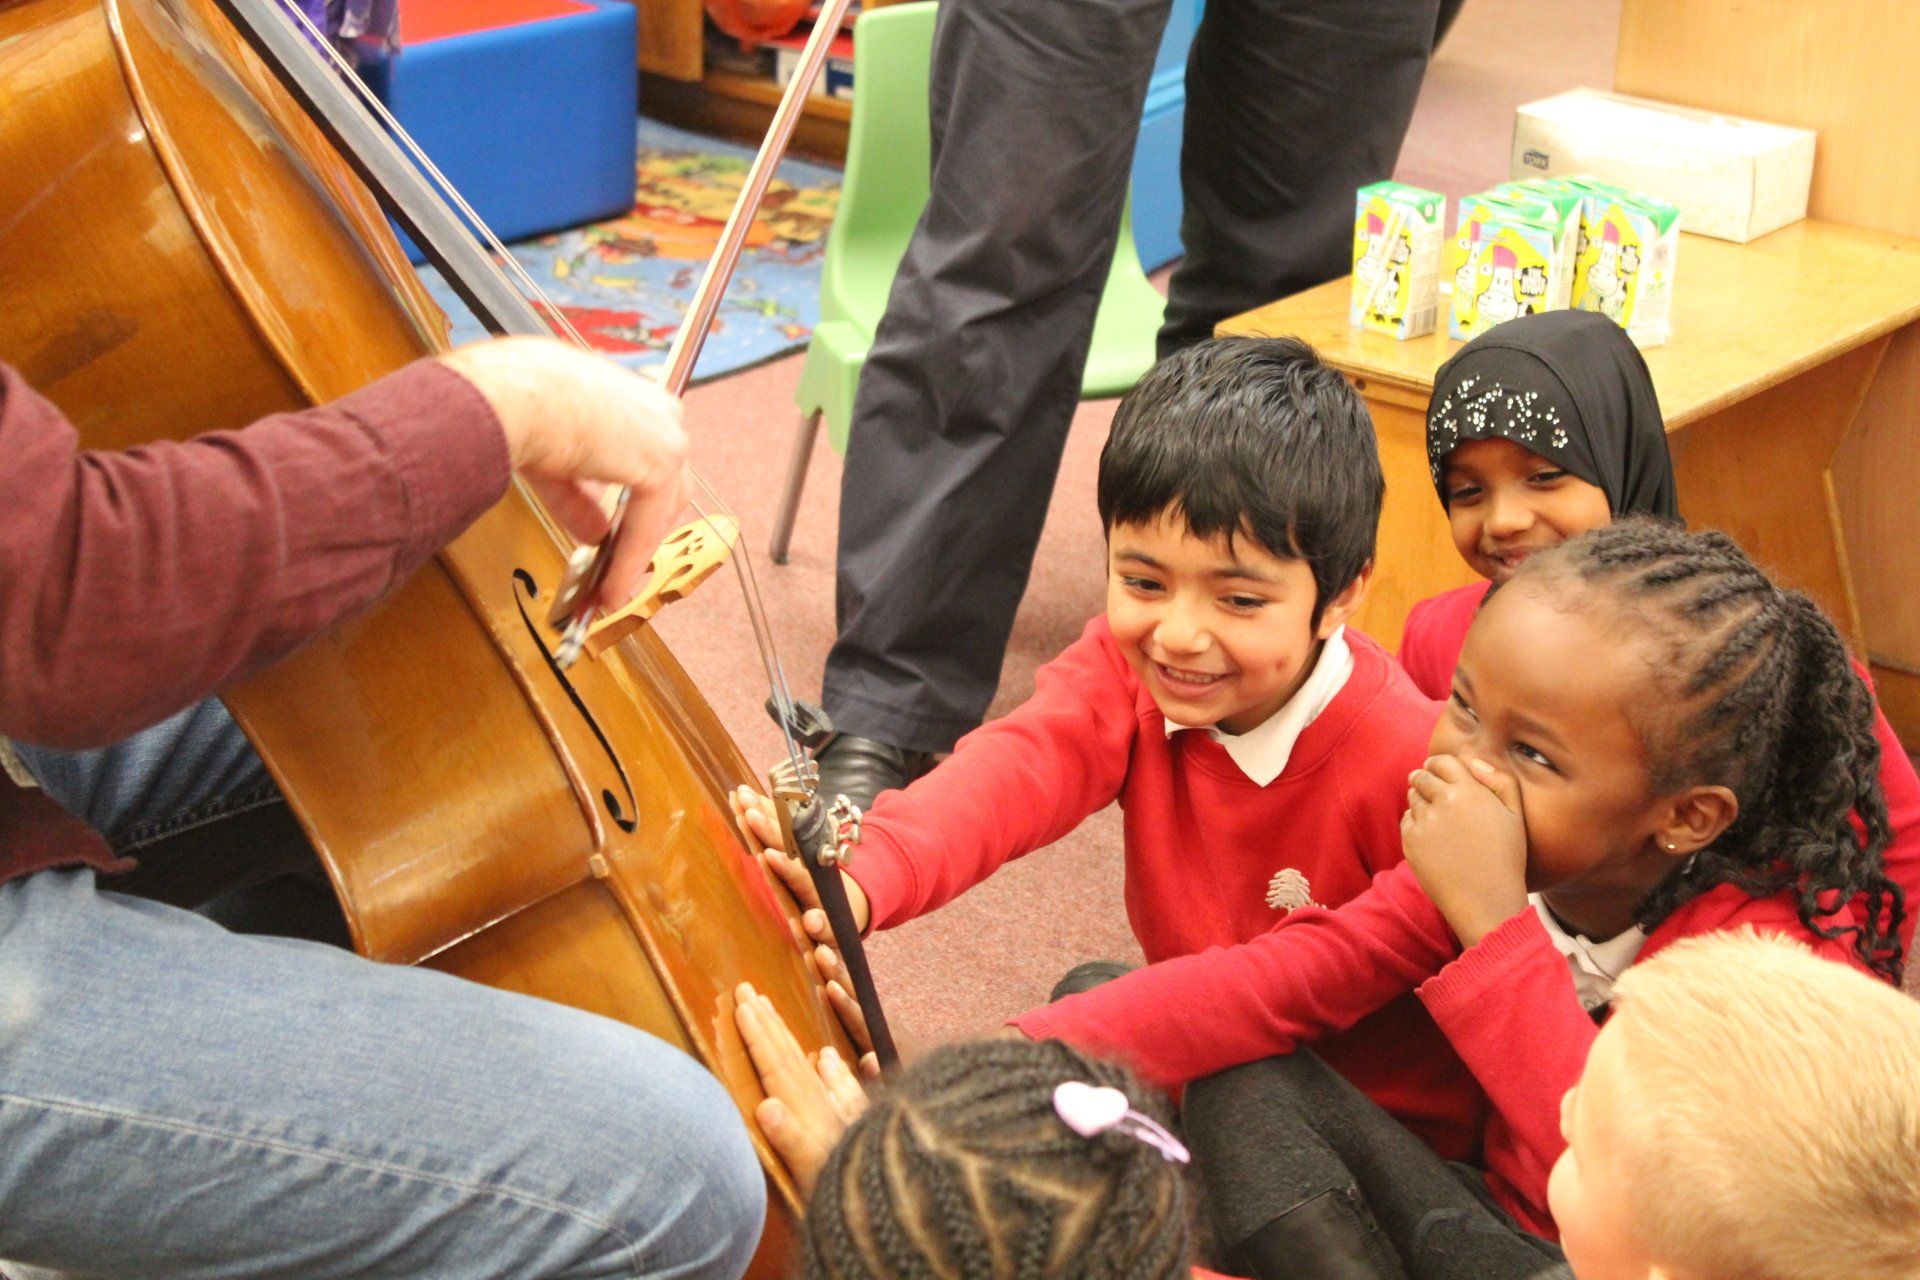 a group of children are sitting on the floor watching a man play a cello